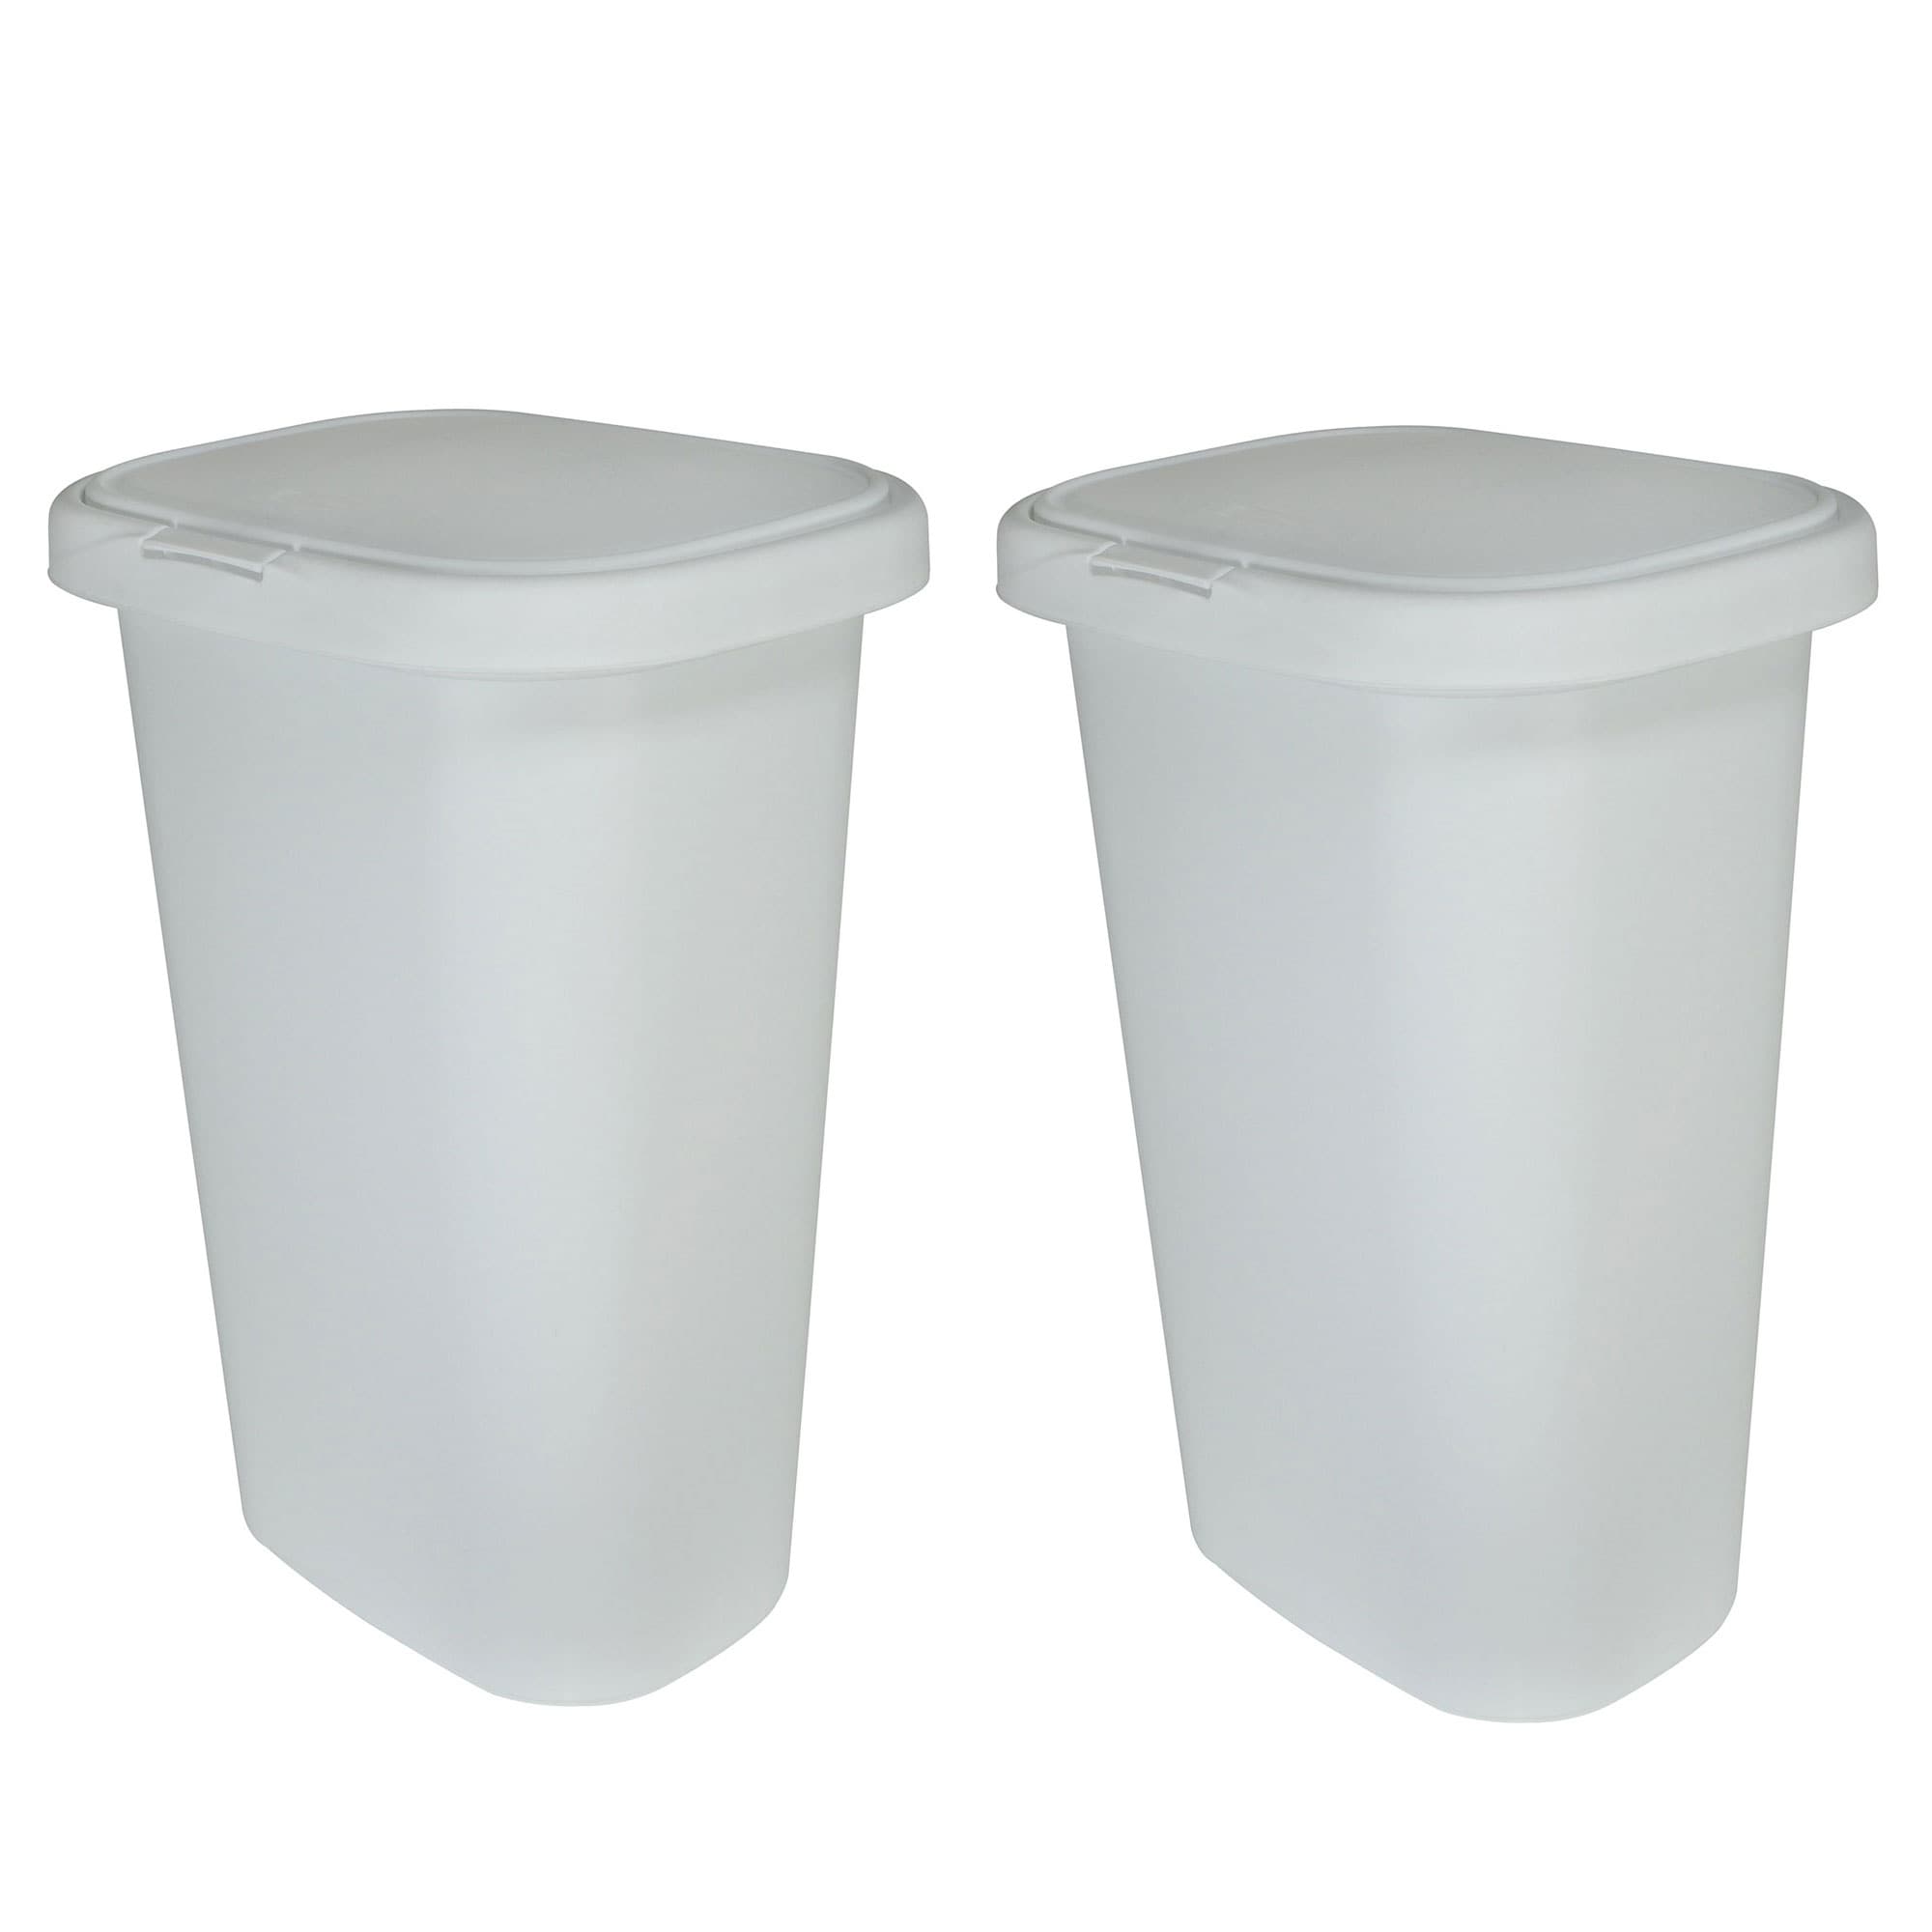 https://ak1.ostkcdn.com/images/products/is/images/direct/62a098b56087a9ce9ade9747c9b3d6f9b1393b69/Rubbermaid-13-Gallon-Rectangular-Spring-Top-Lid-Trash-Can-%282-Pack%29.jpg